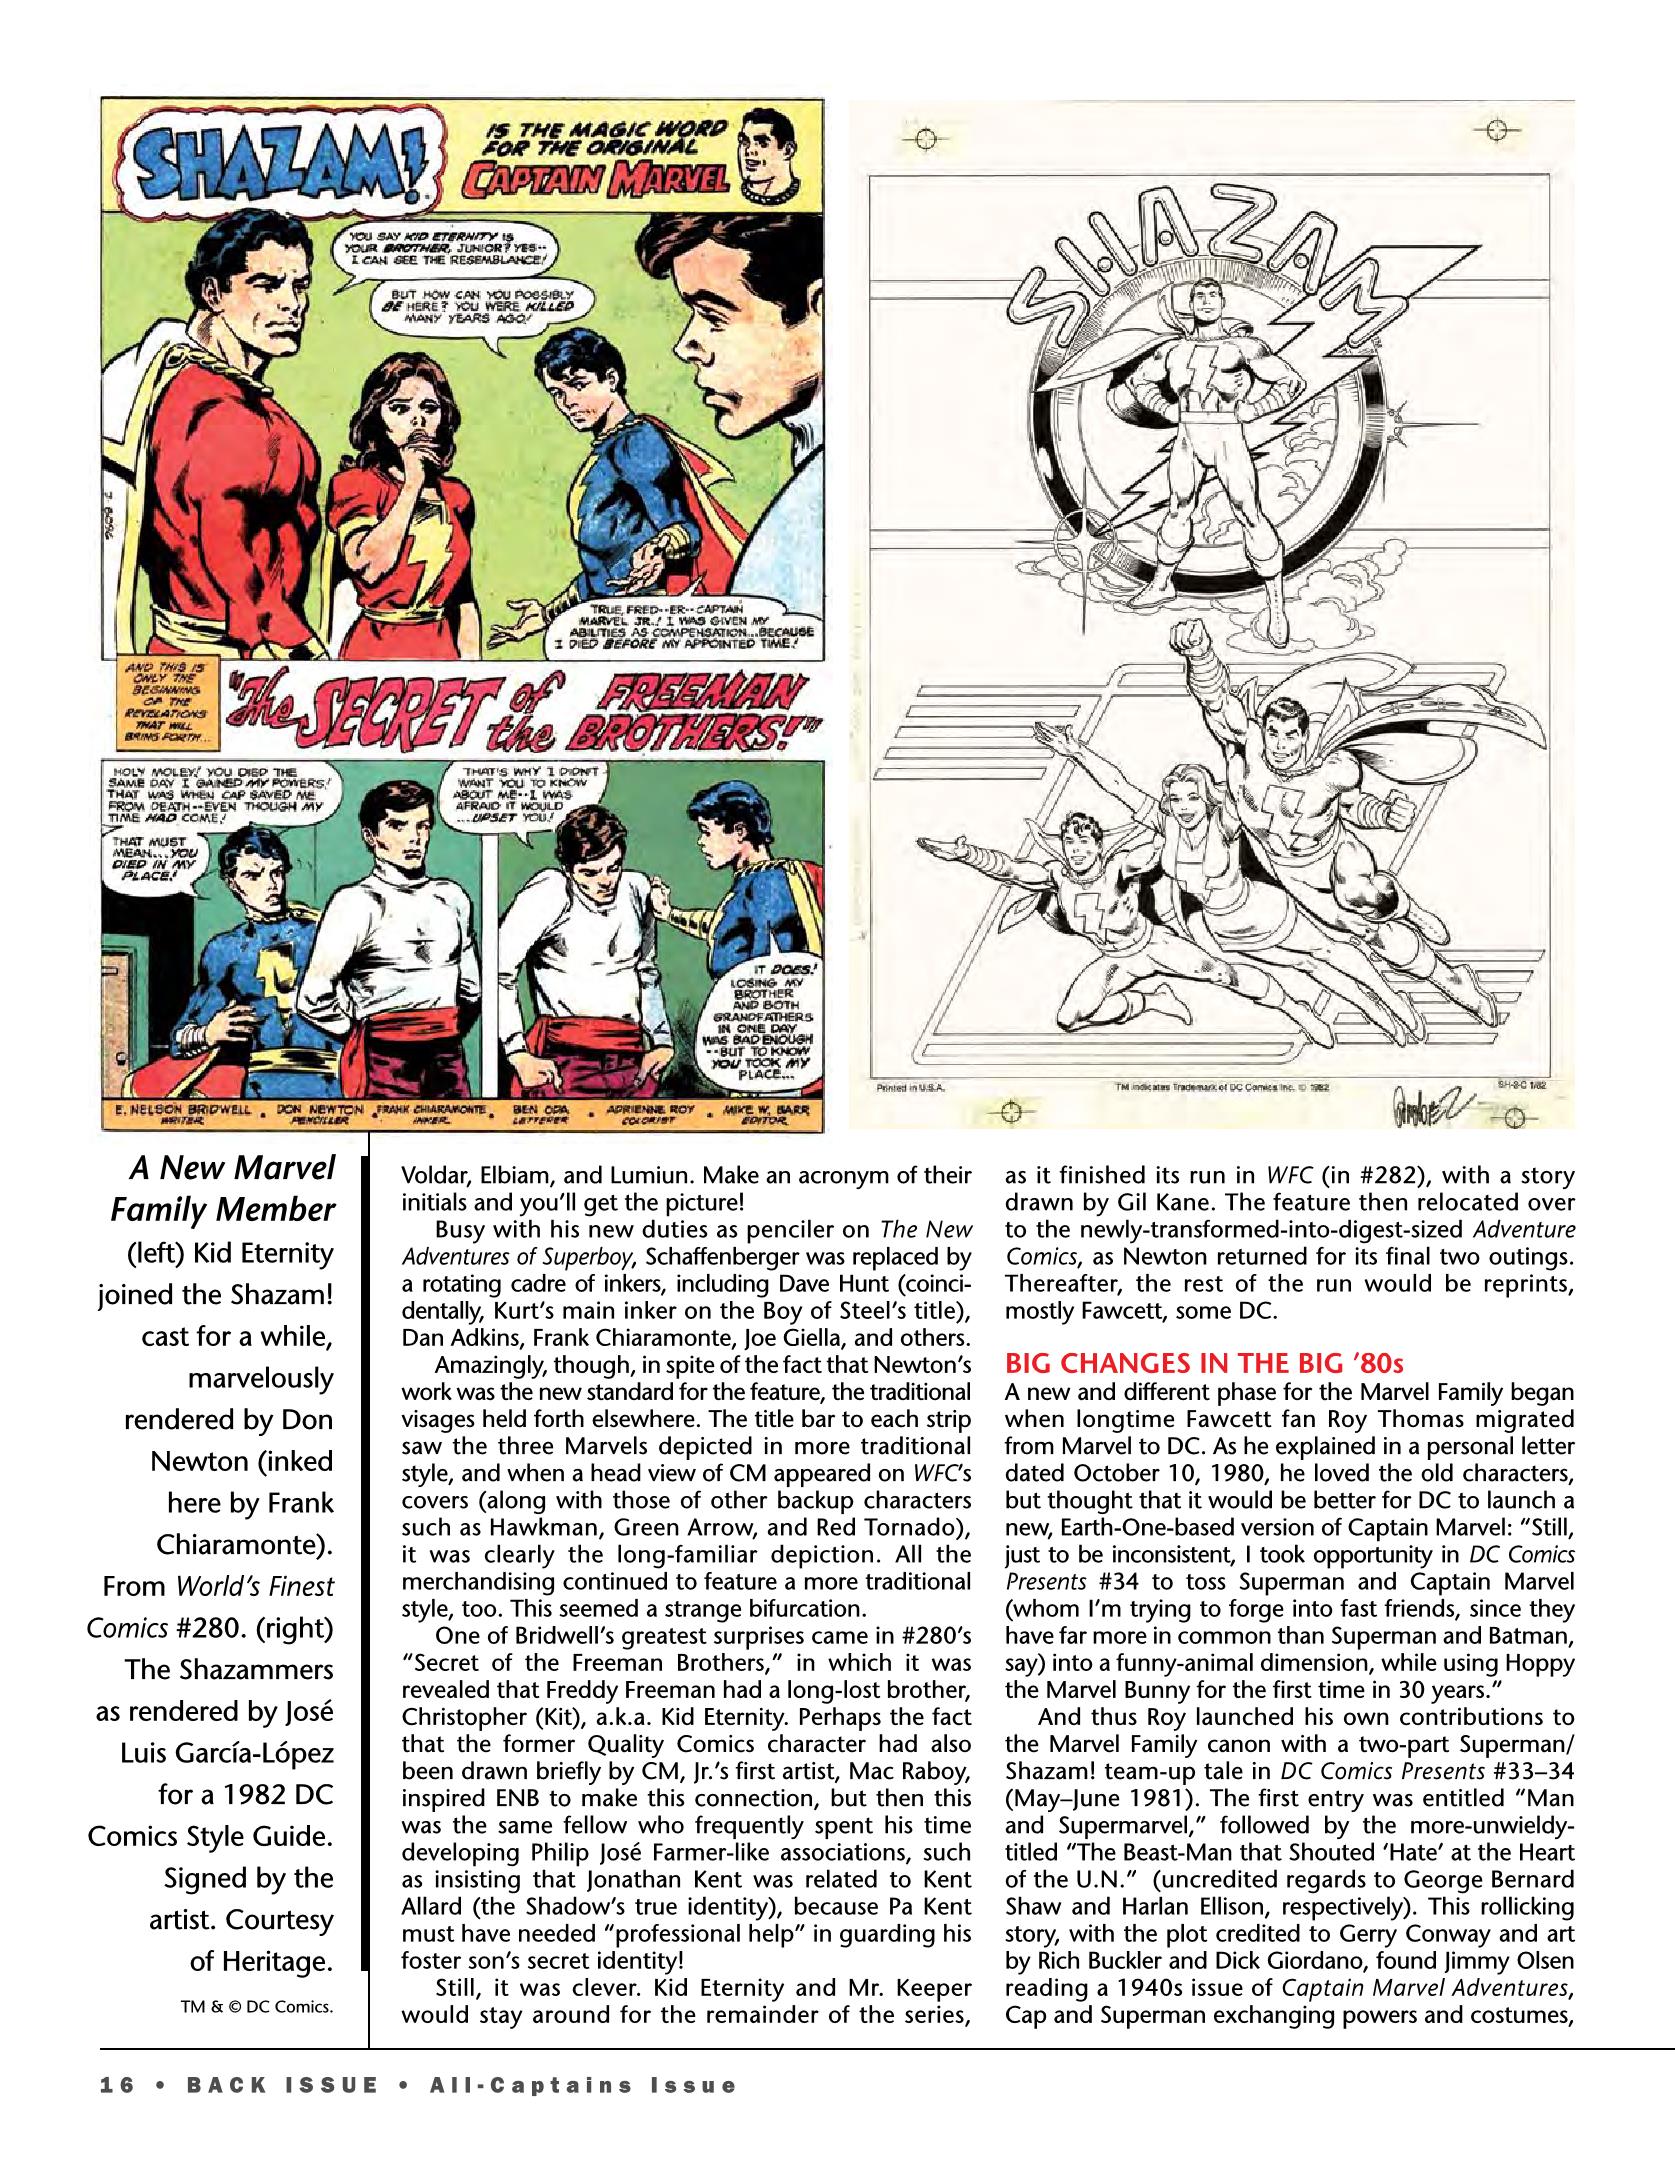 Read online Back Issue comic -  Issue #93 - 10